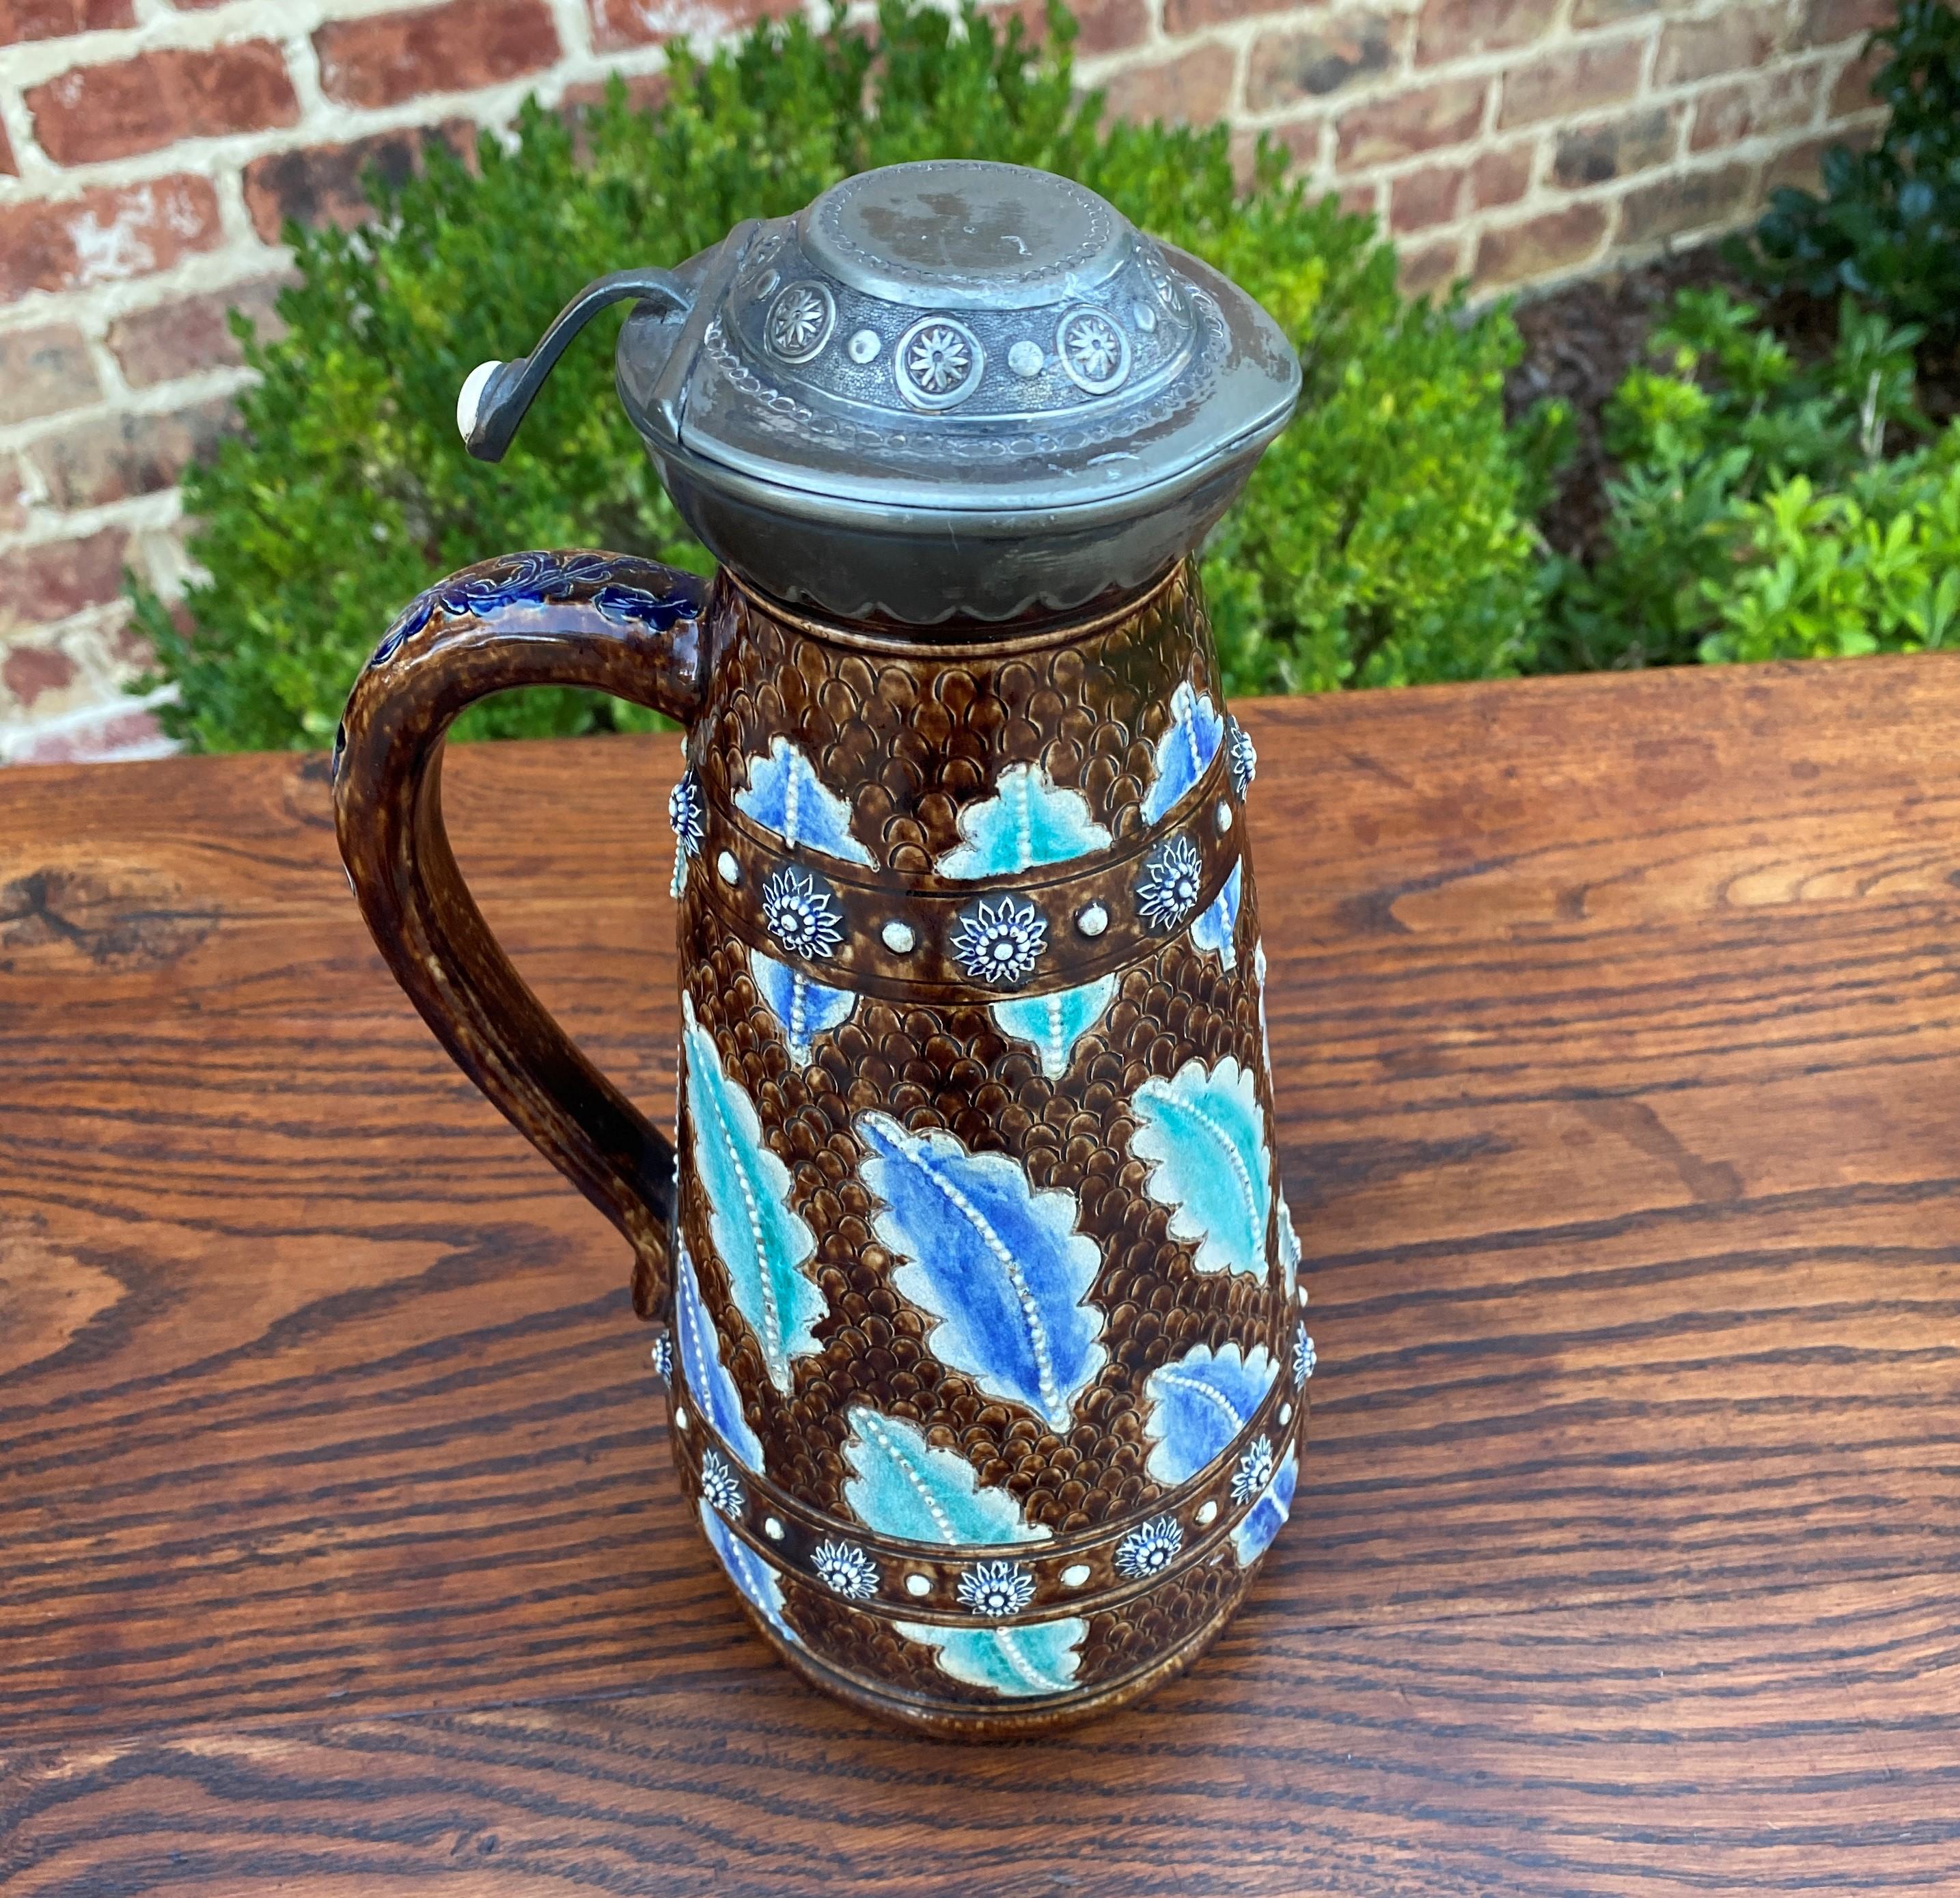 Unique and beautiful antique French Majolica Stein, Jug or Pitcher~~Silver or Pewter Hinged Lid~~c. 1900

Authentic French Majolica stein~~vibrant colors of brown, green, and blue~~a must have for collectors!

Although most of our inventory is